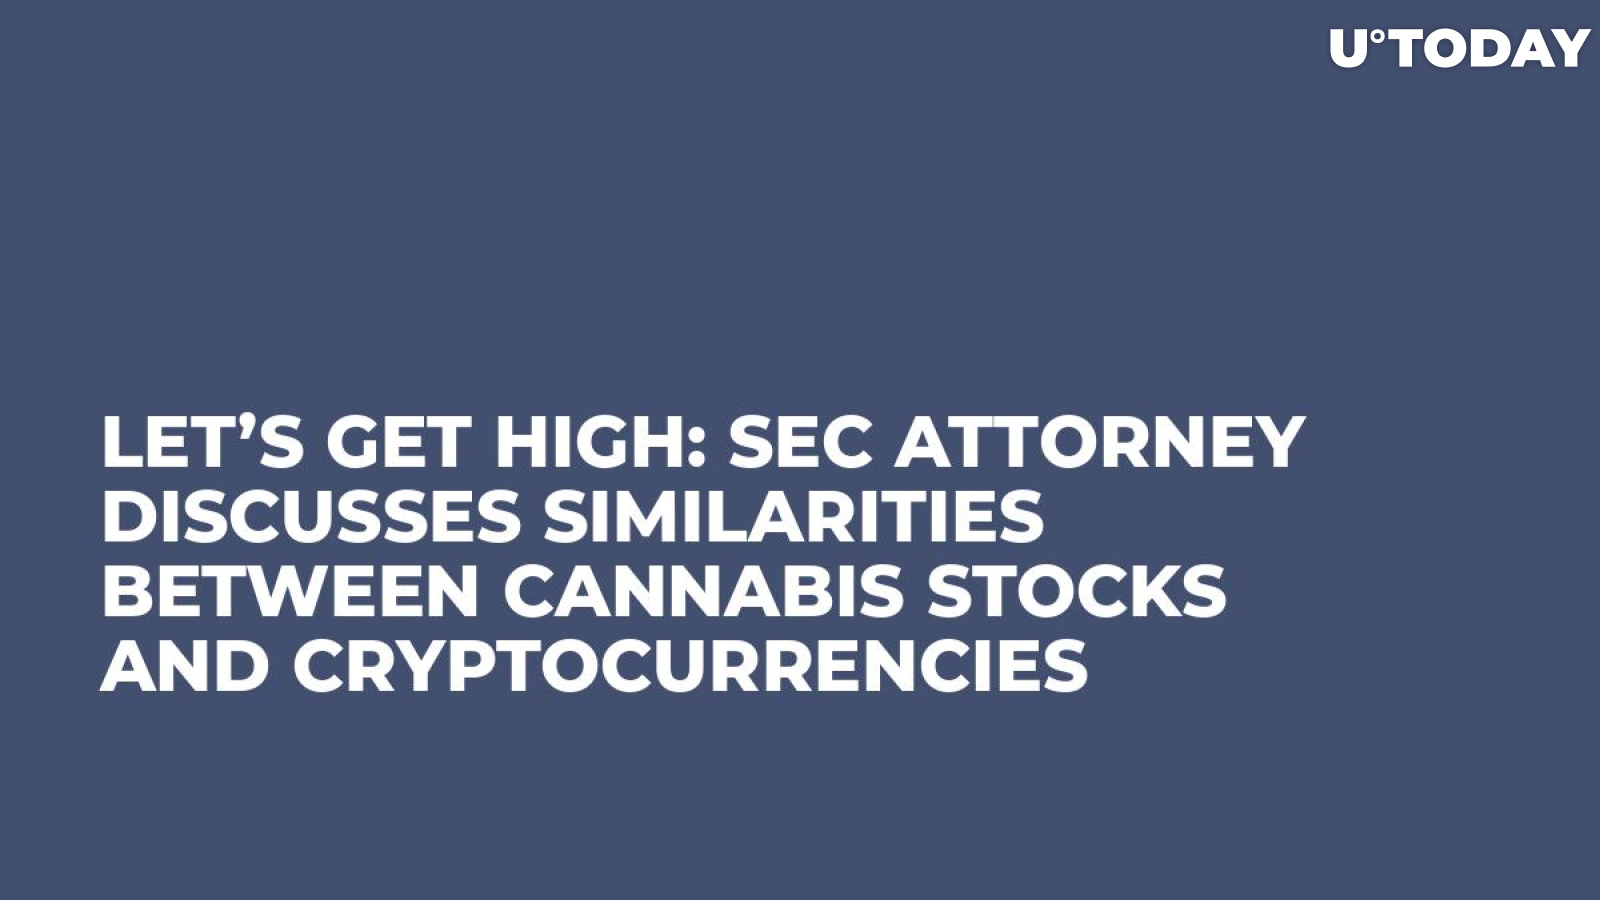 Let’s Get High: SEC Attorney Discusses Similarities Between Cannabis Stocks and Cryptocurrencies 